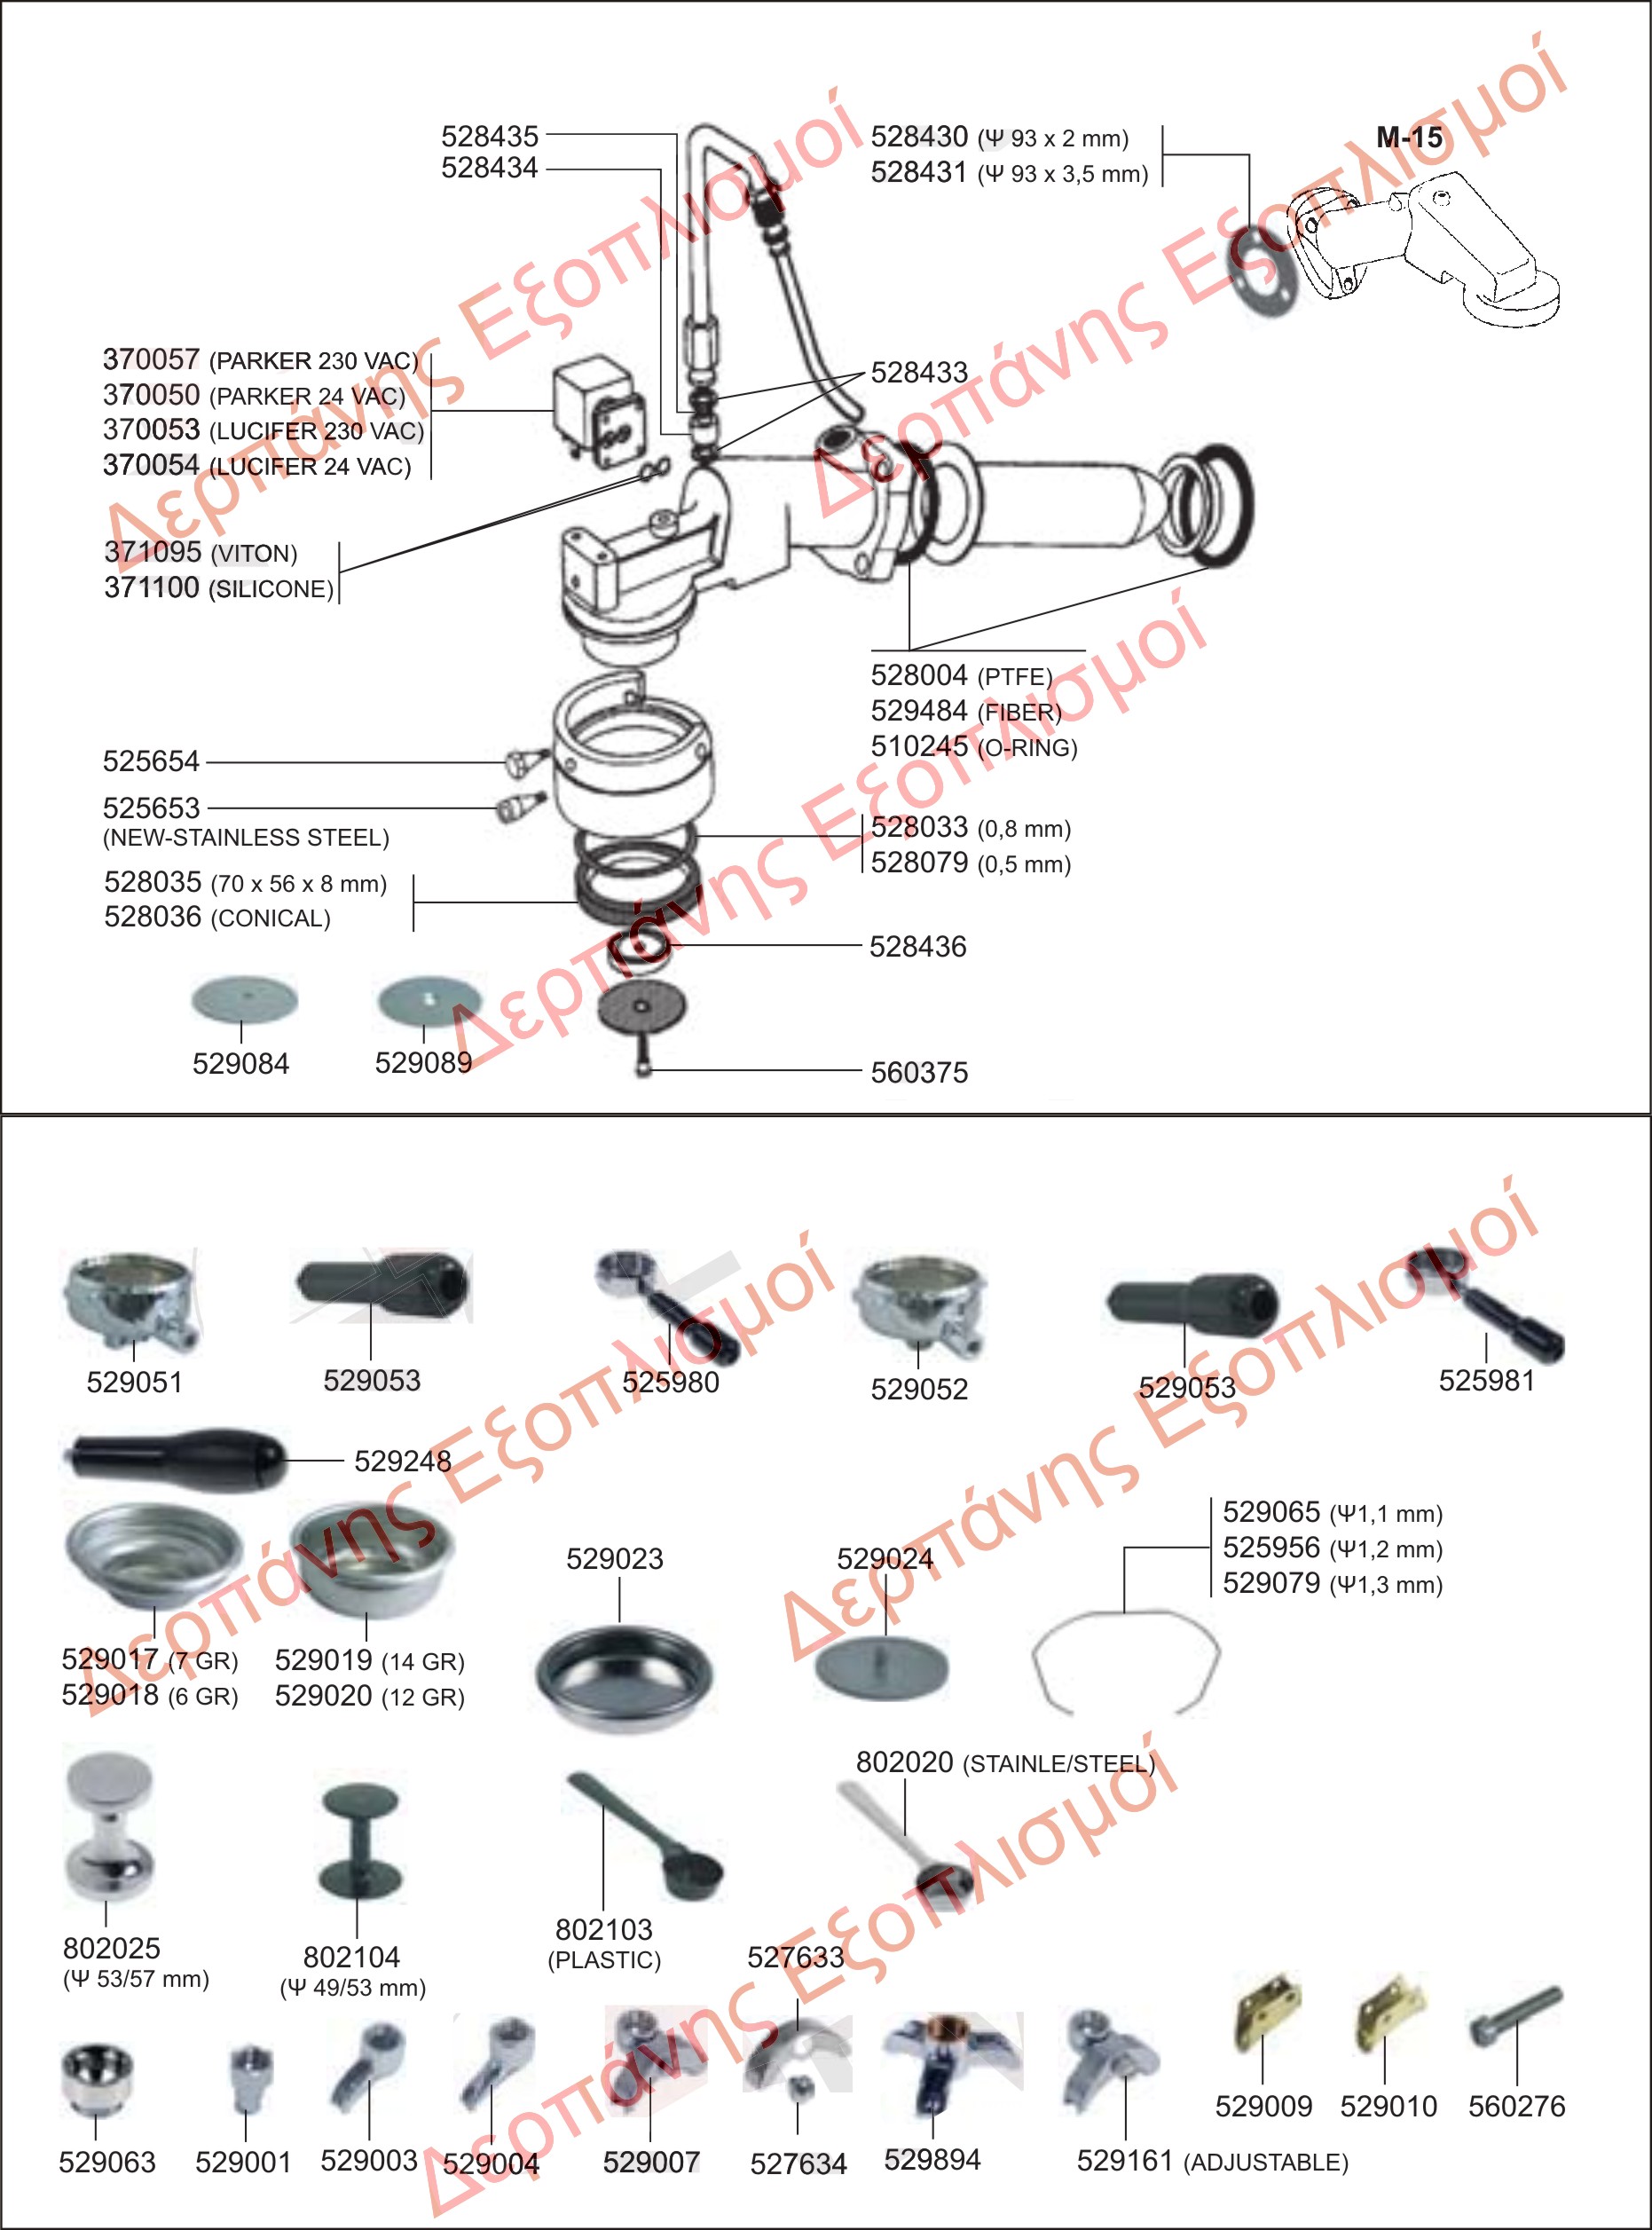 Spare parts and technical manual